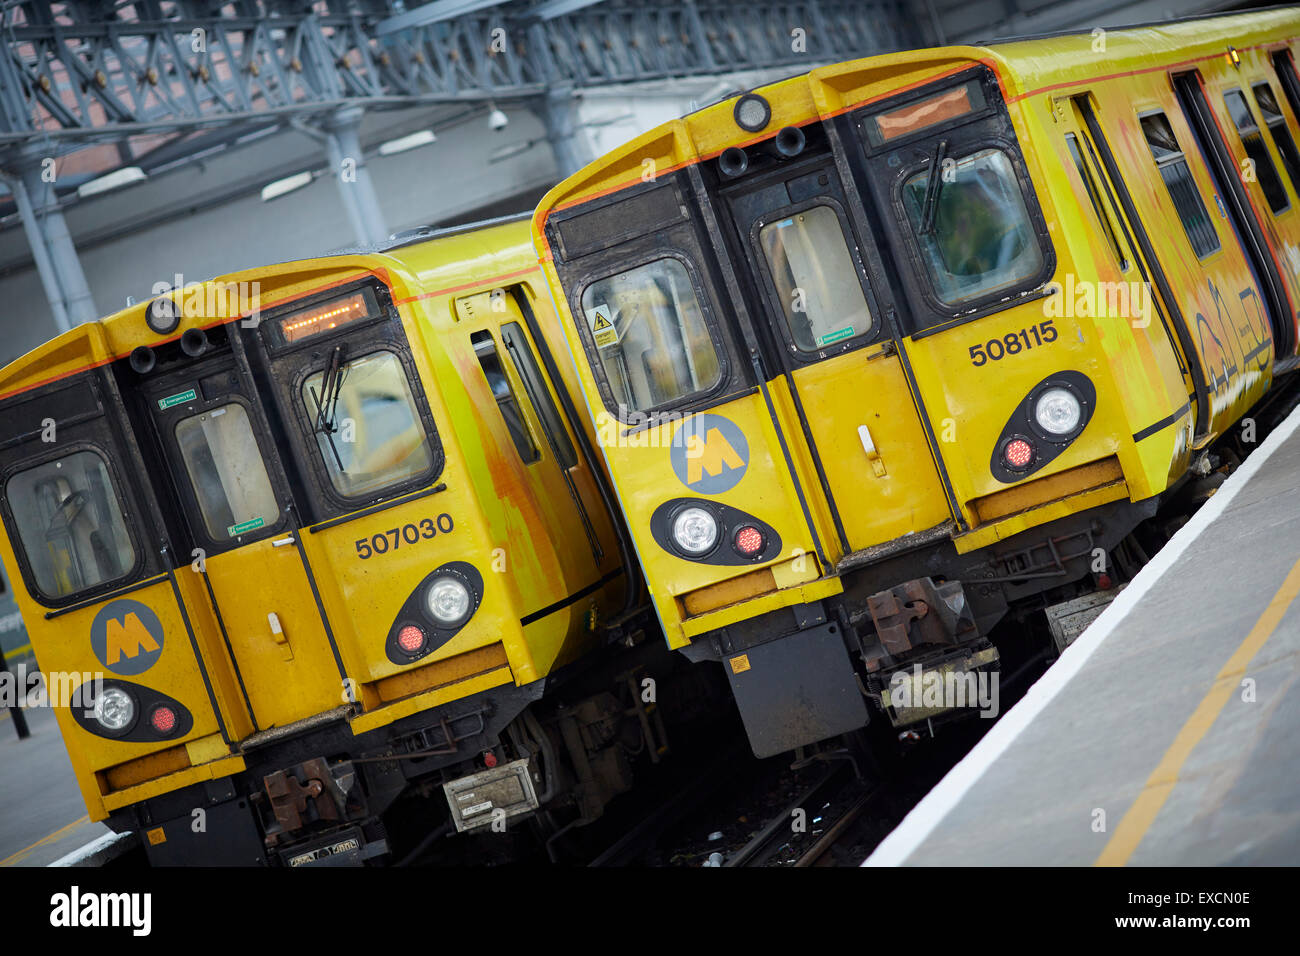 Pictures around Southport   Pictured  Southport merseyrail class 508 and 507  trains   The Liverpool line was originally built i Stock Photo